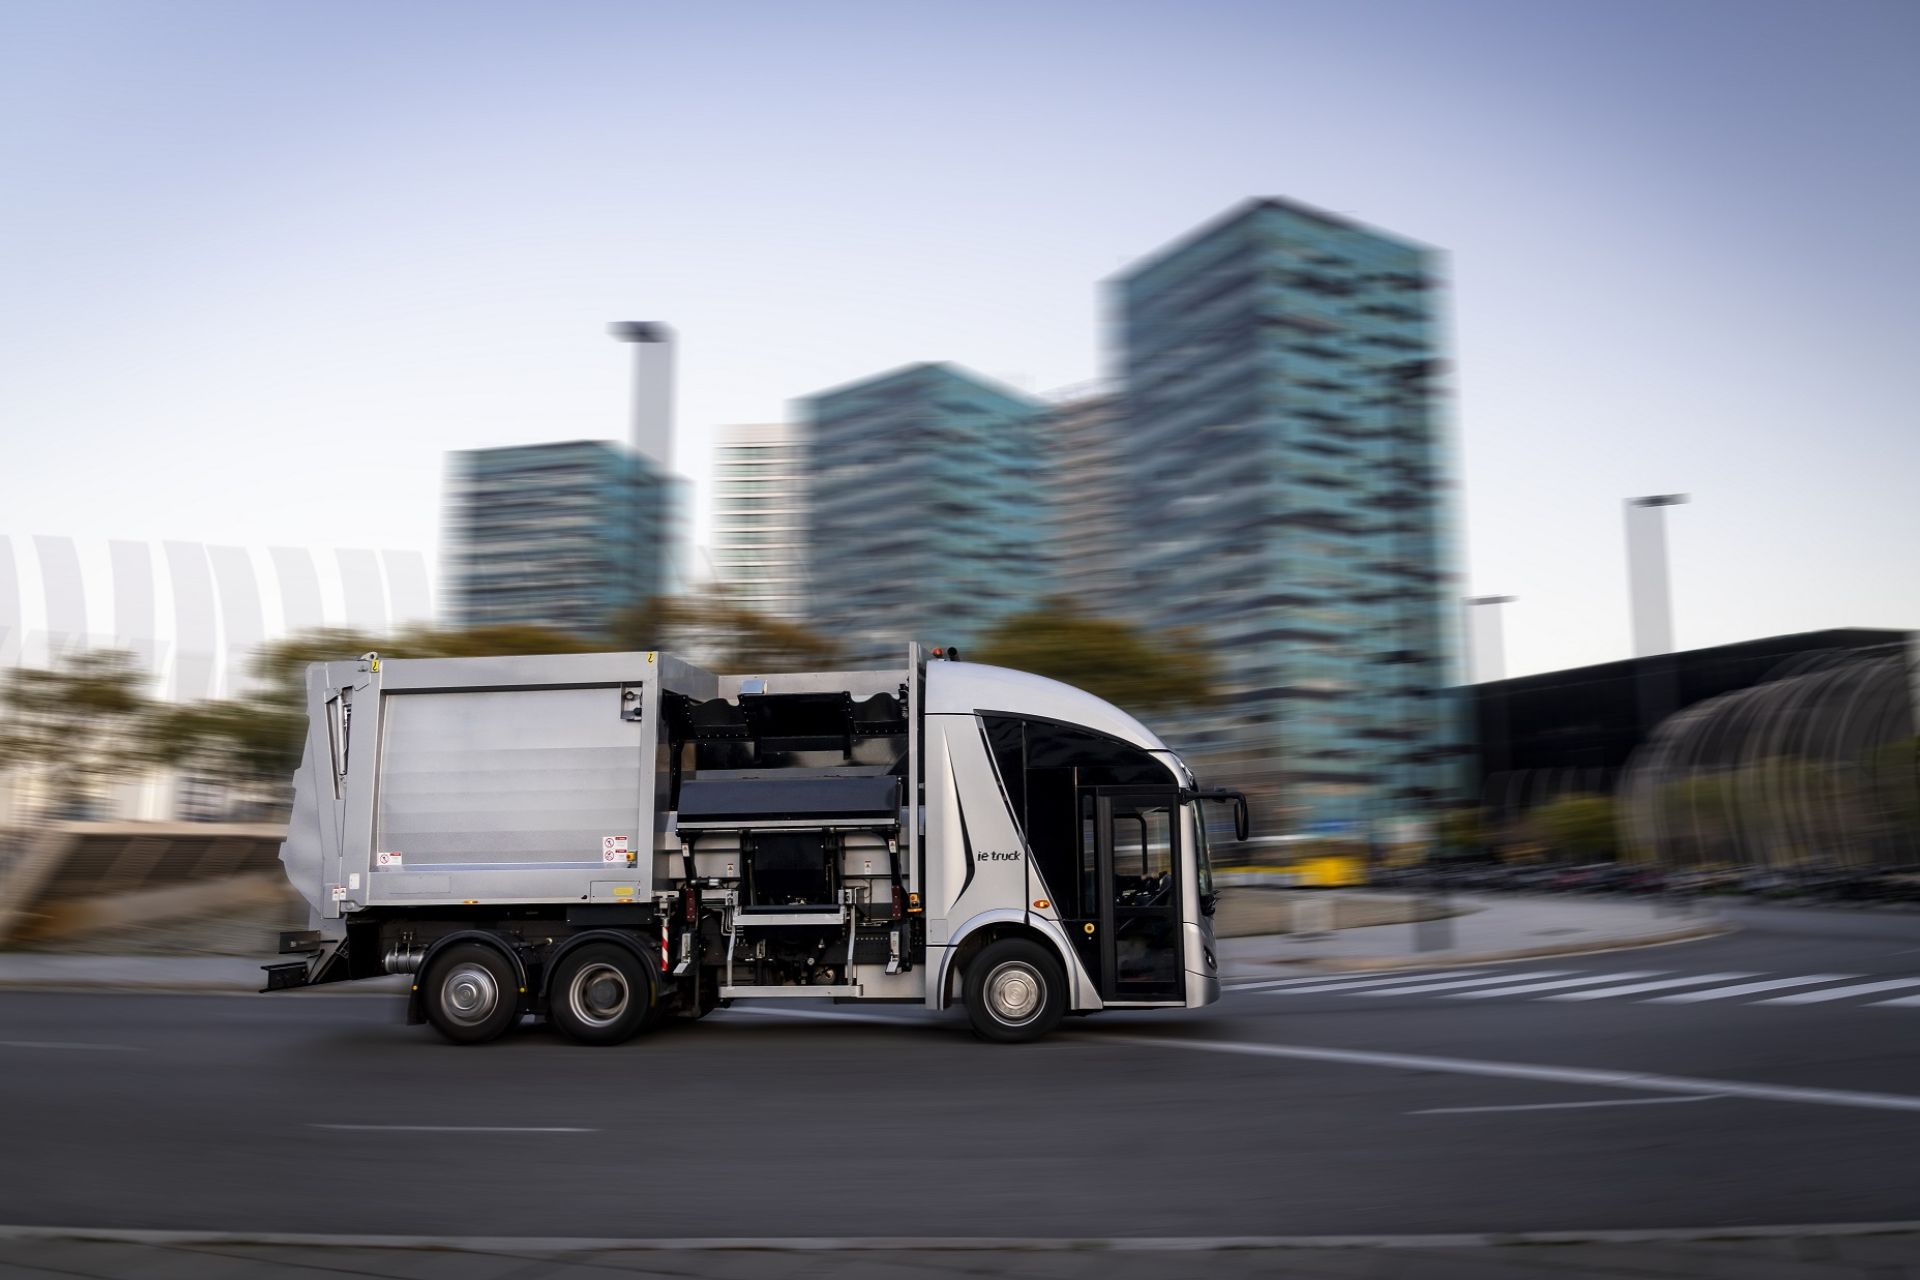 FCC Medio Ambiente and Irizar agree to produce the first 10 Irizar ie urban electric trucks